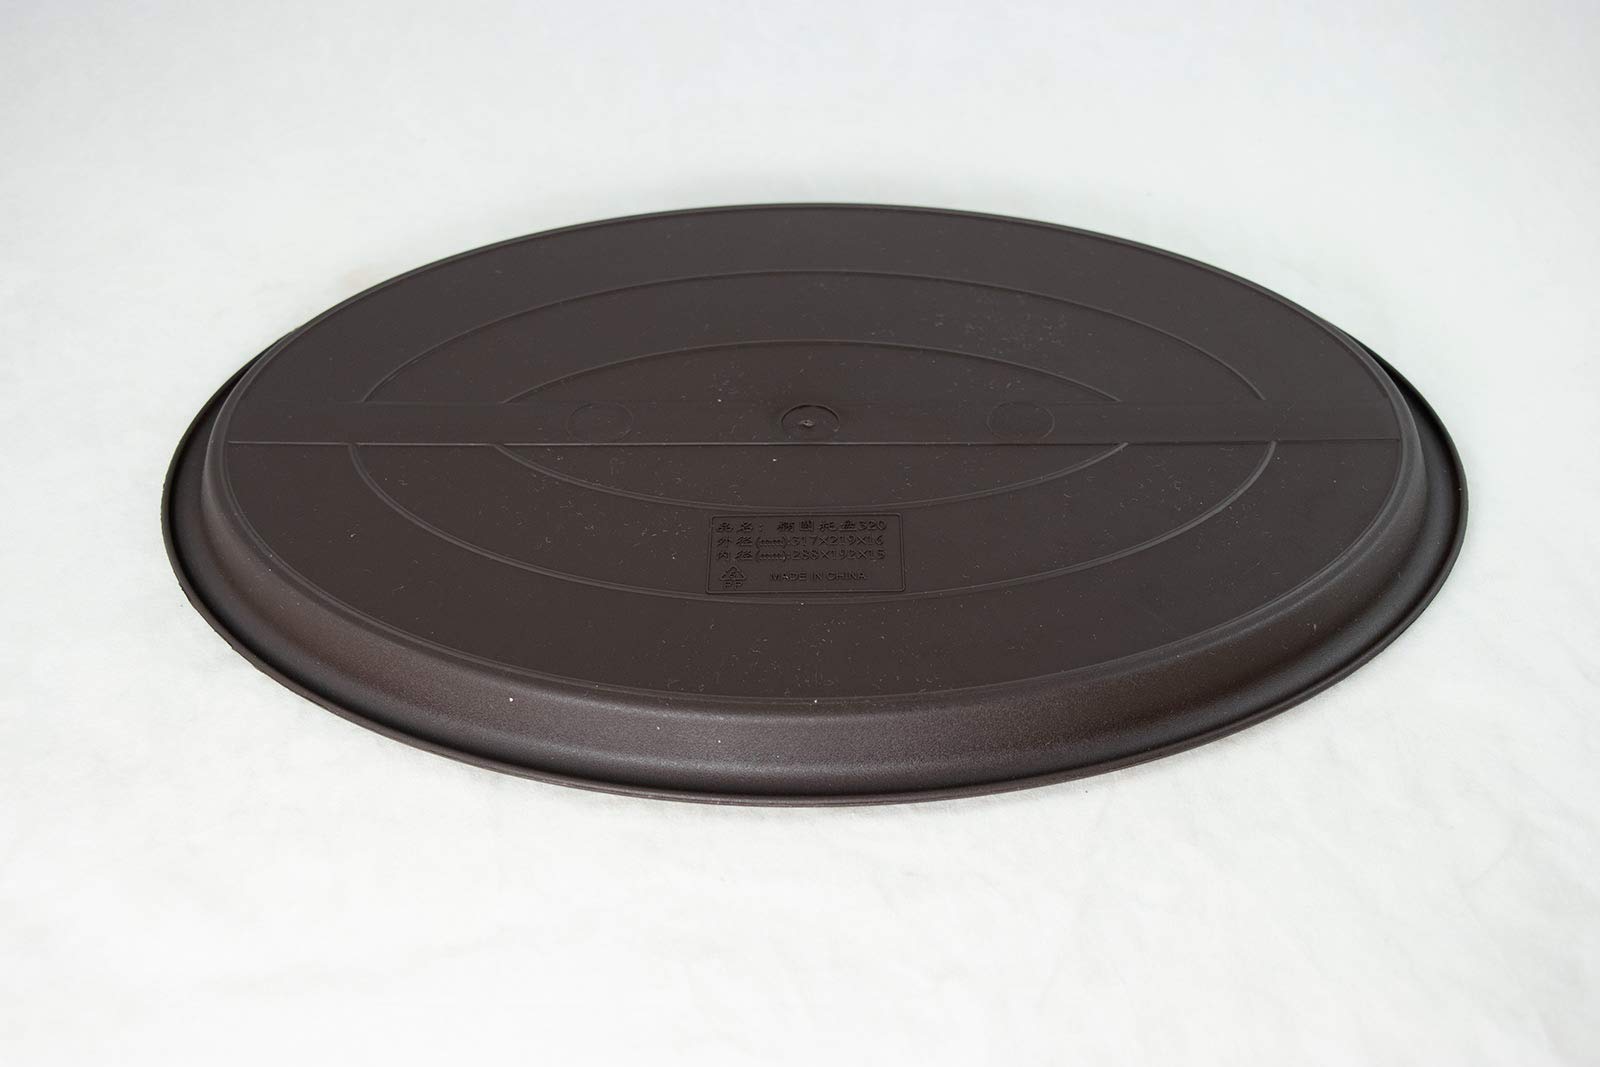 Calibonsai 3 Mix oval Brown Plastic Humidity Tray for Bonsai Tree-9 inch,10.75 inch and 12.5 inch